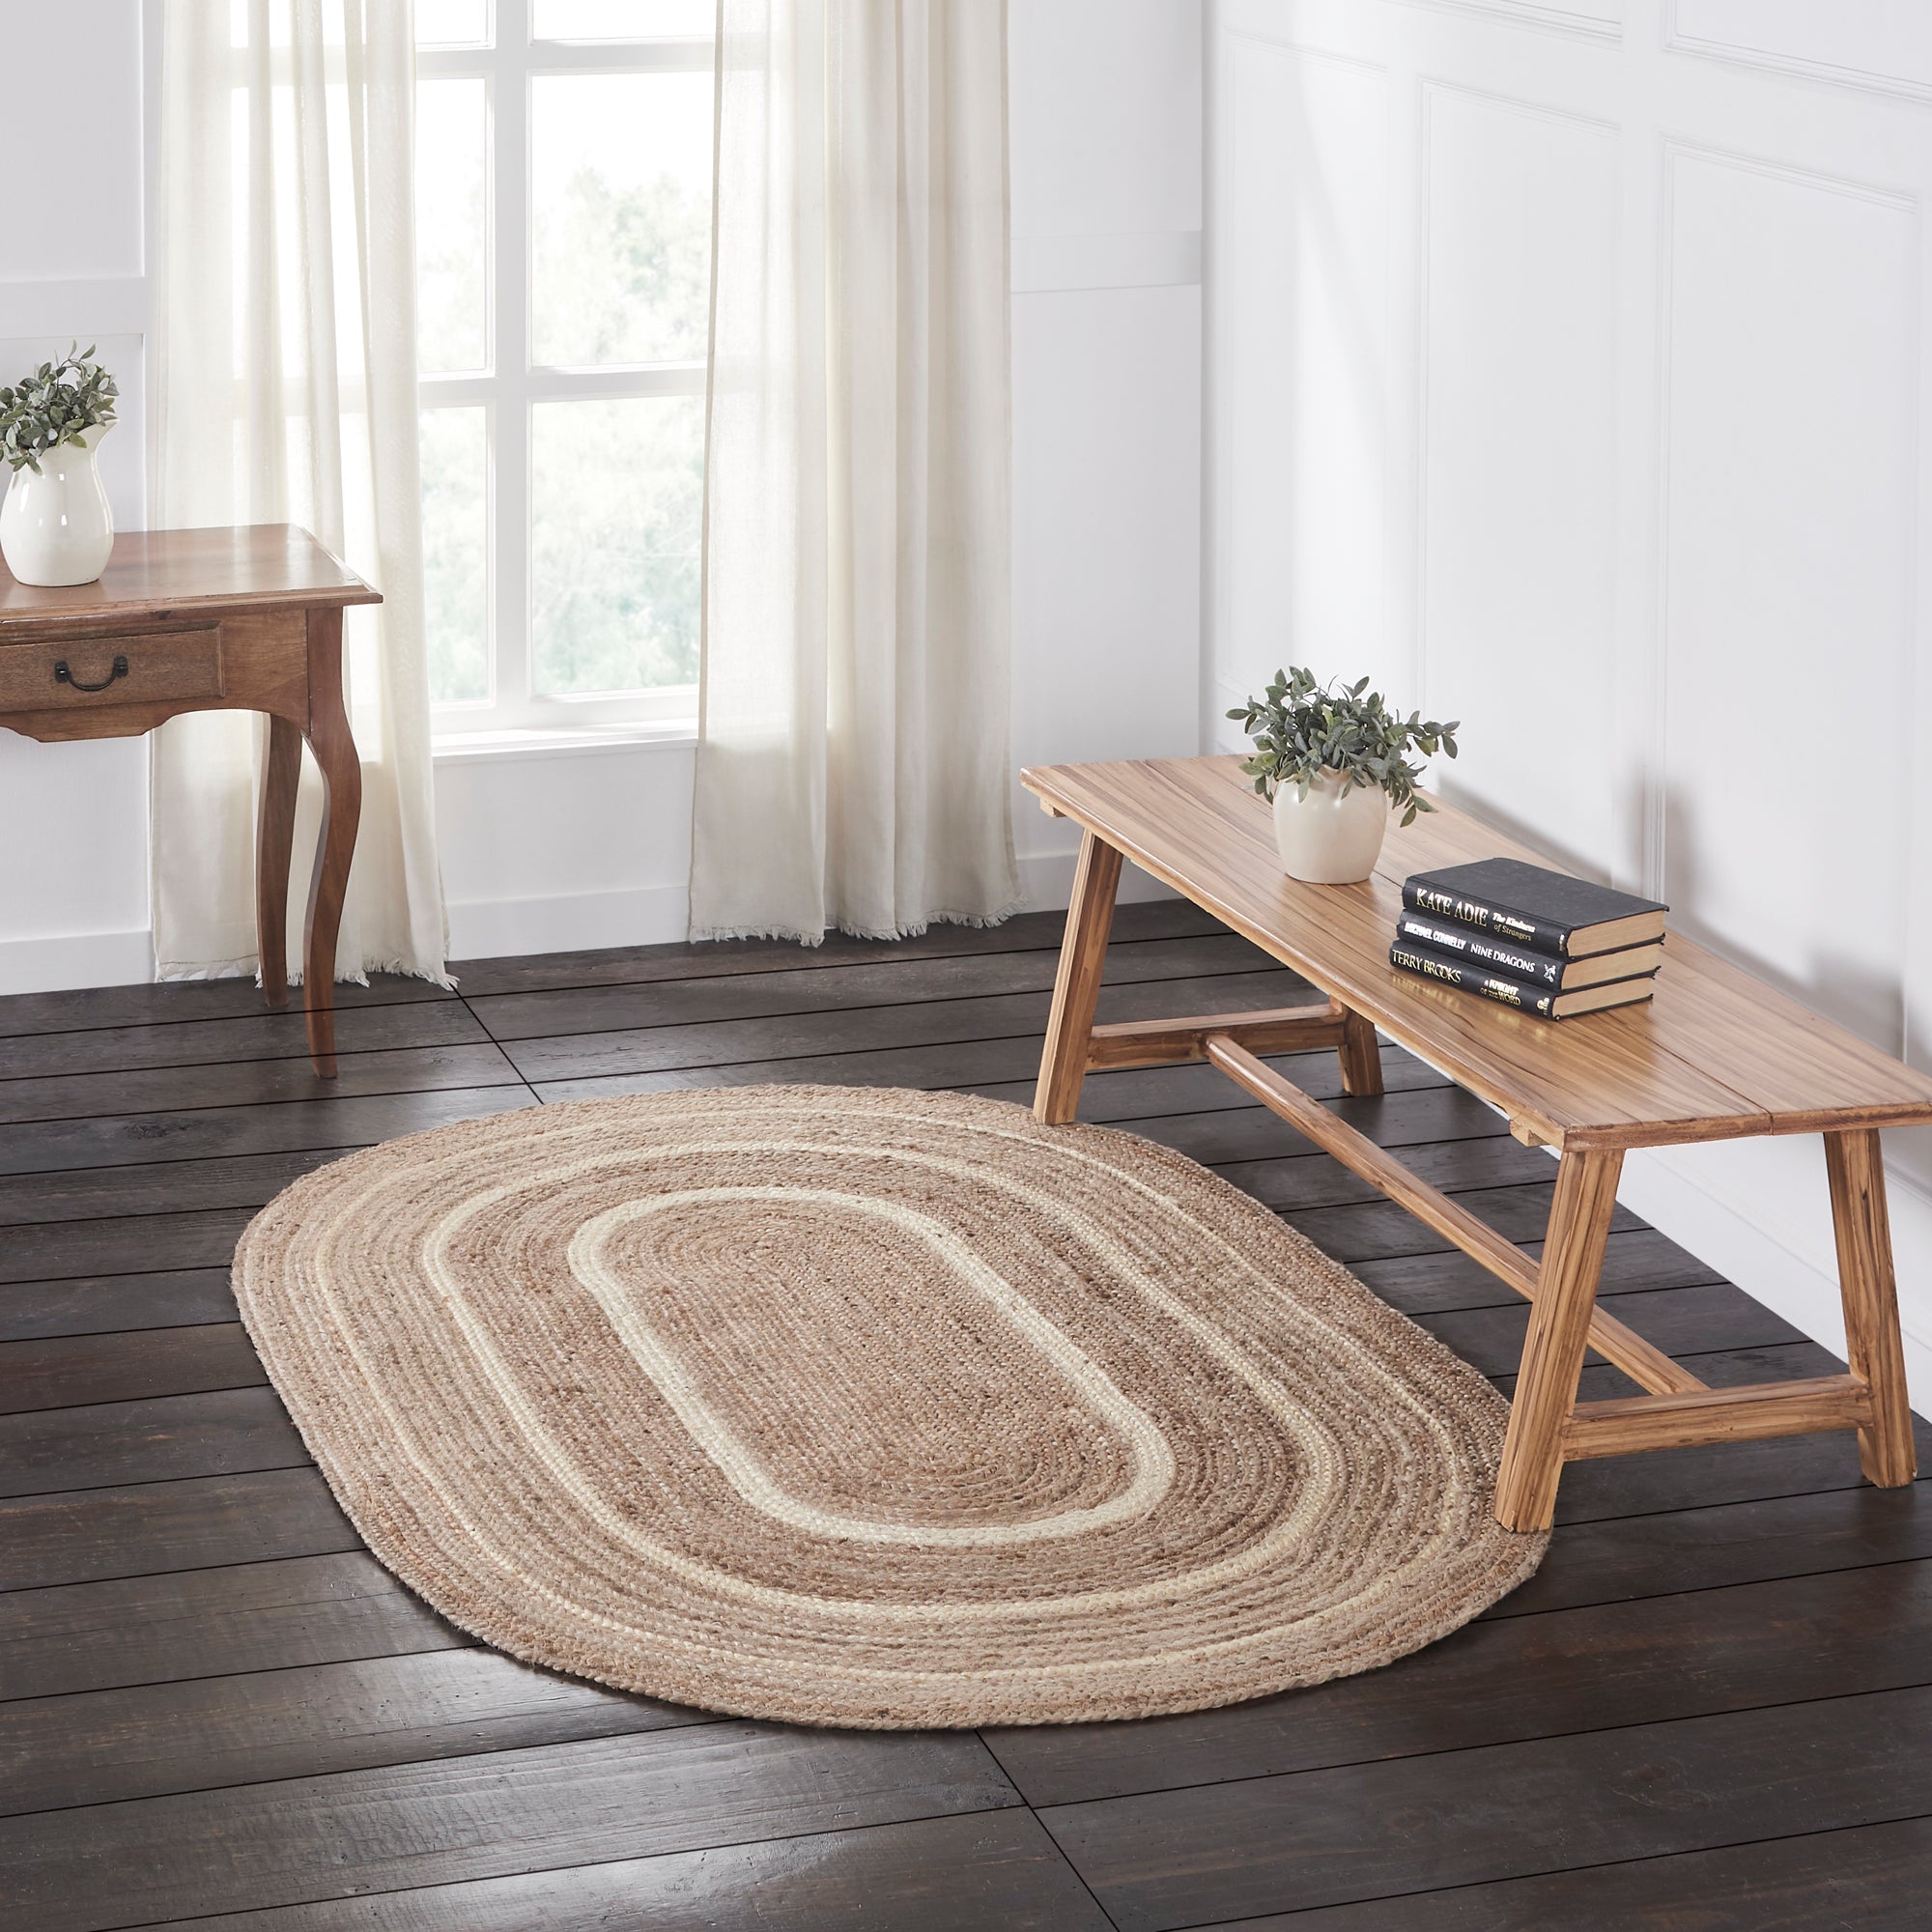 Natural & Creme Jute Braided Rugs Oval with Rug Pads VHC Brands